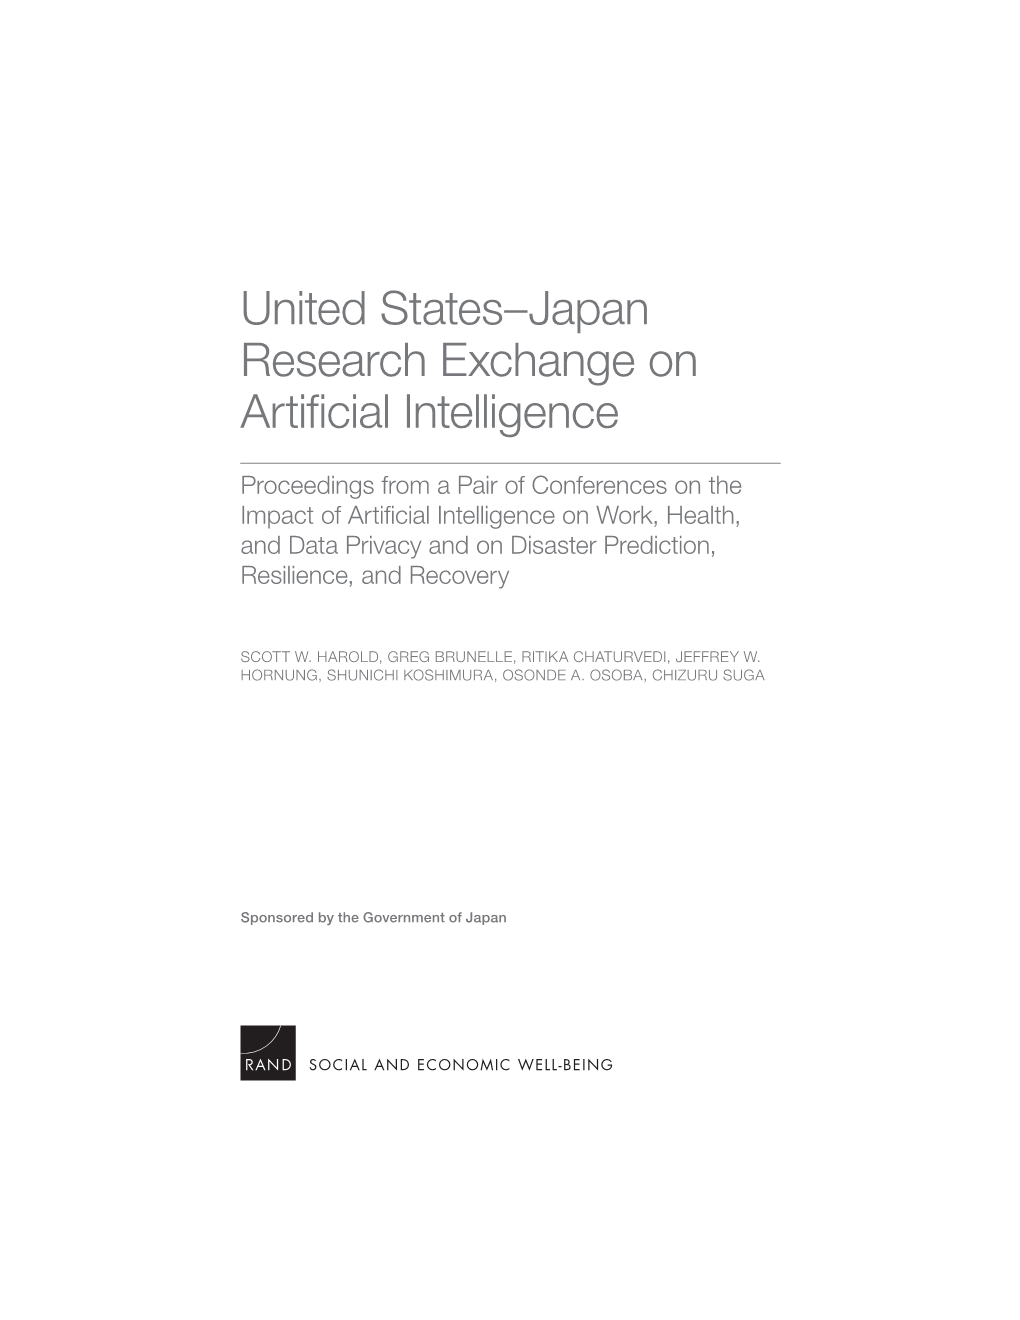 United States-Japan Research Exchange on Artificial Intelligence